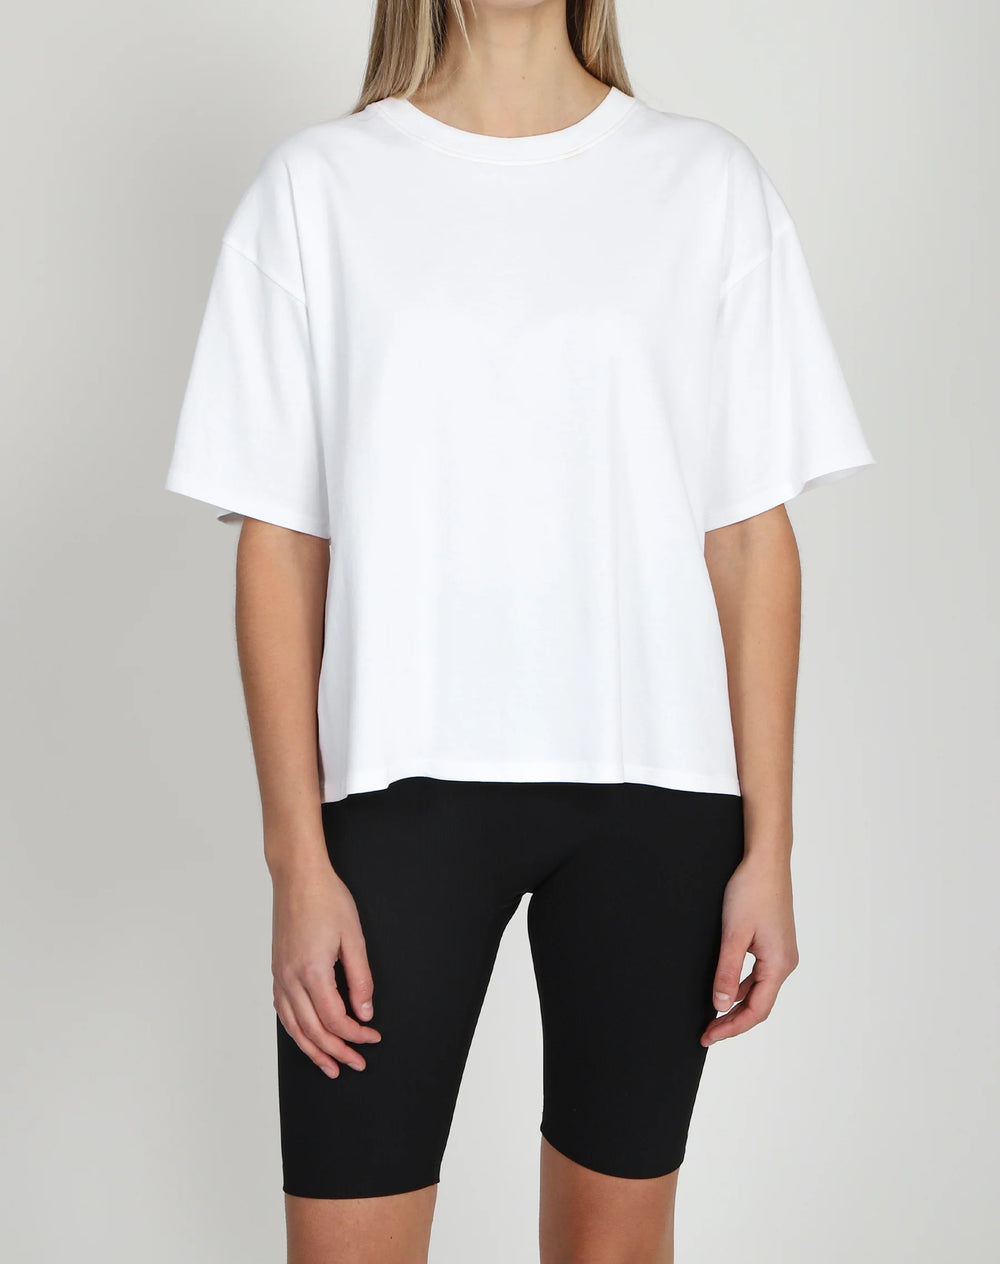 The Boxy Crew Neck Tee by Brunette the Label